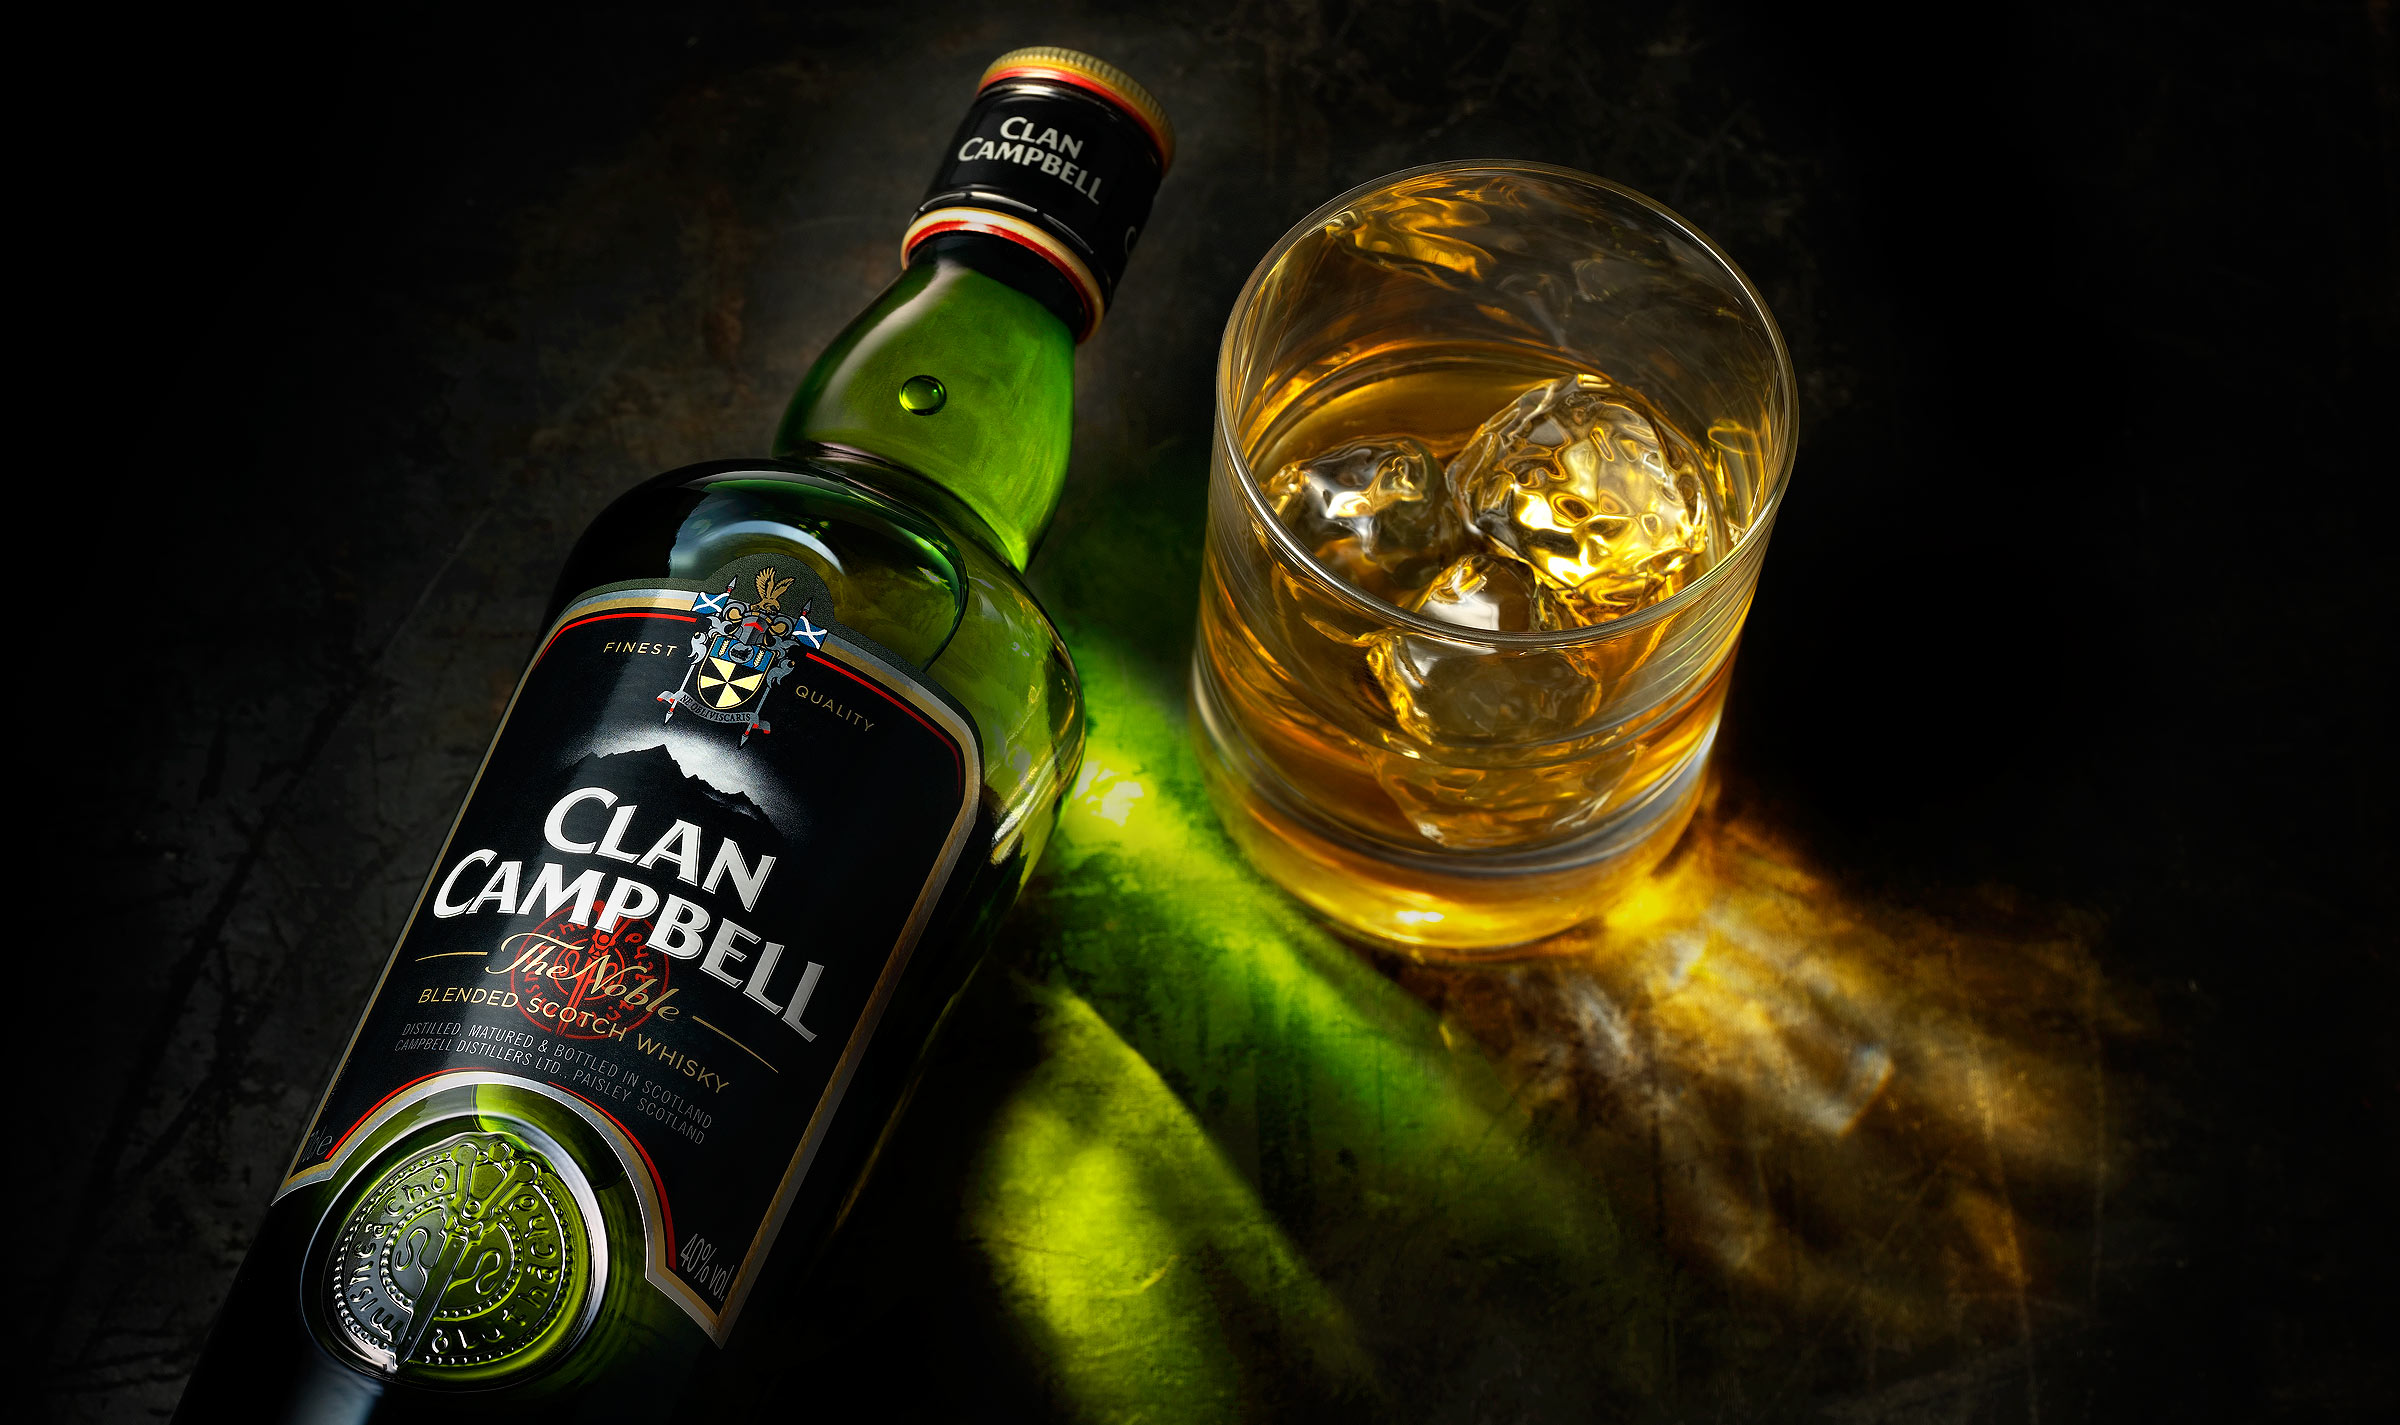 Clan Campbell Scotch Whisky| Warren Ryley Photography 01